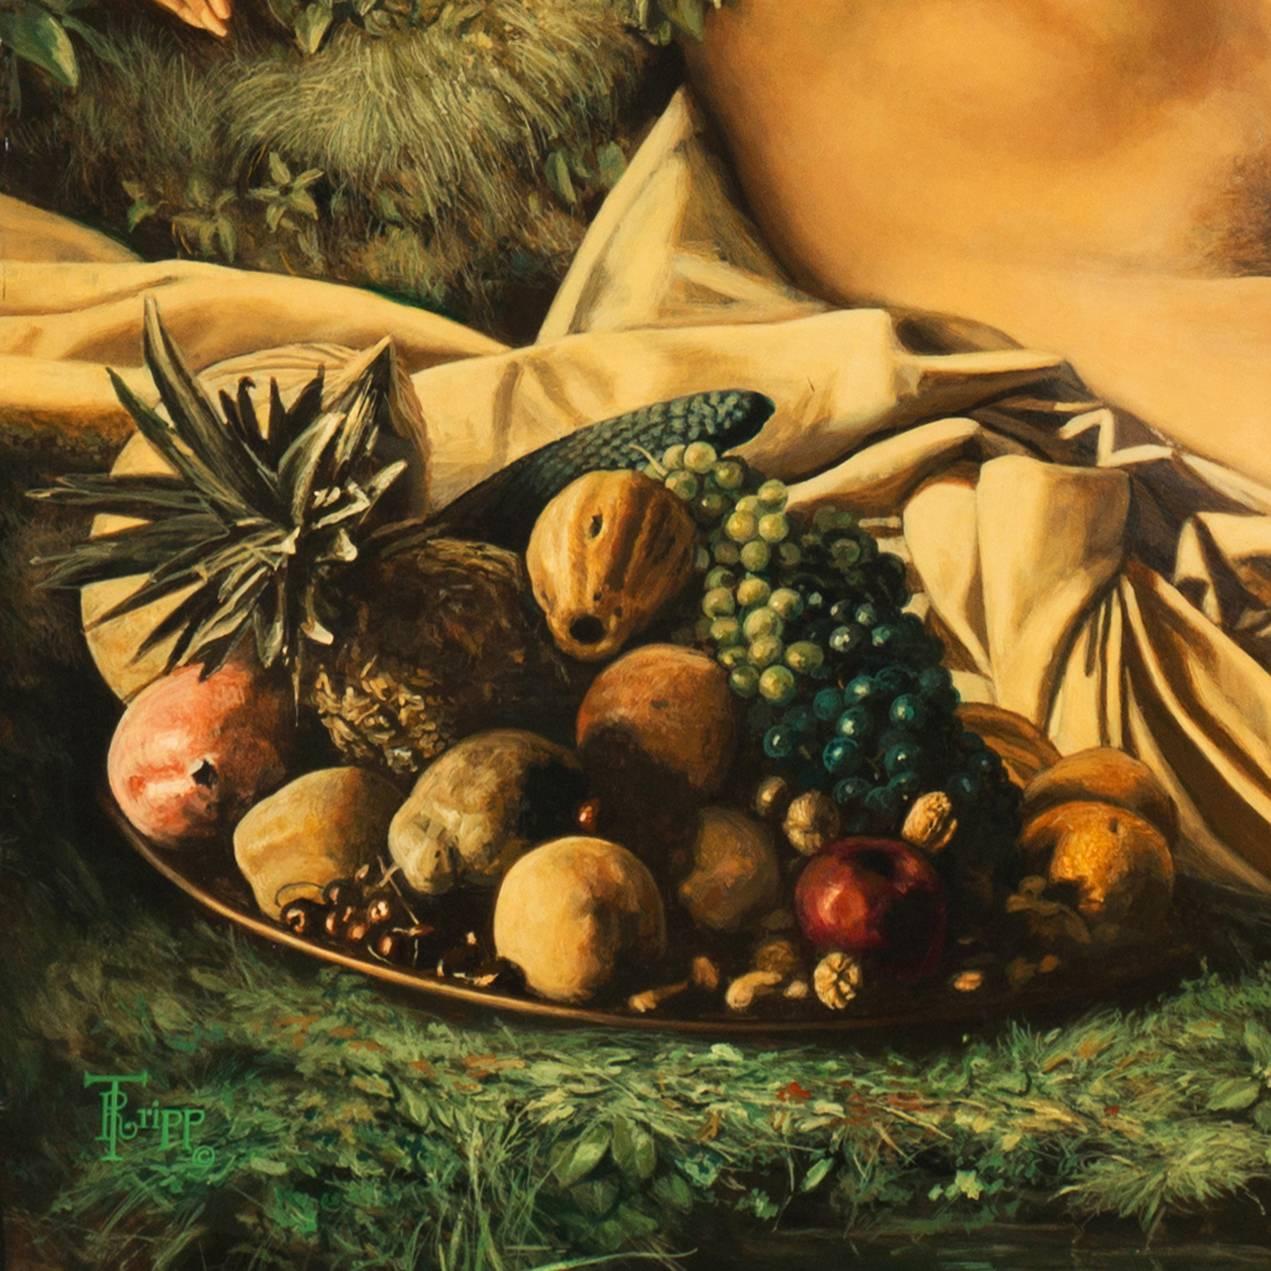 Signed lower left and dated, verso, 1978.

A substantial, figural tempera in the Florentine High Renaissance style showing a seated nude, reclining in a bower and holding a bunch of grapes while gazing candidly towards the viewer. Exceptionally fine